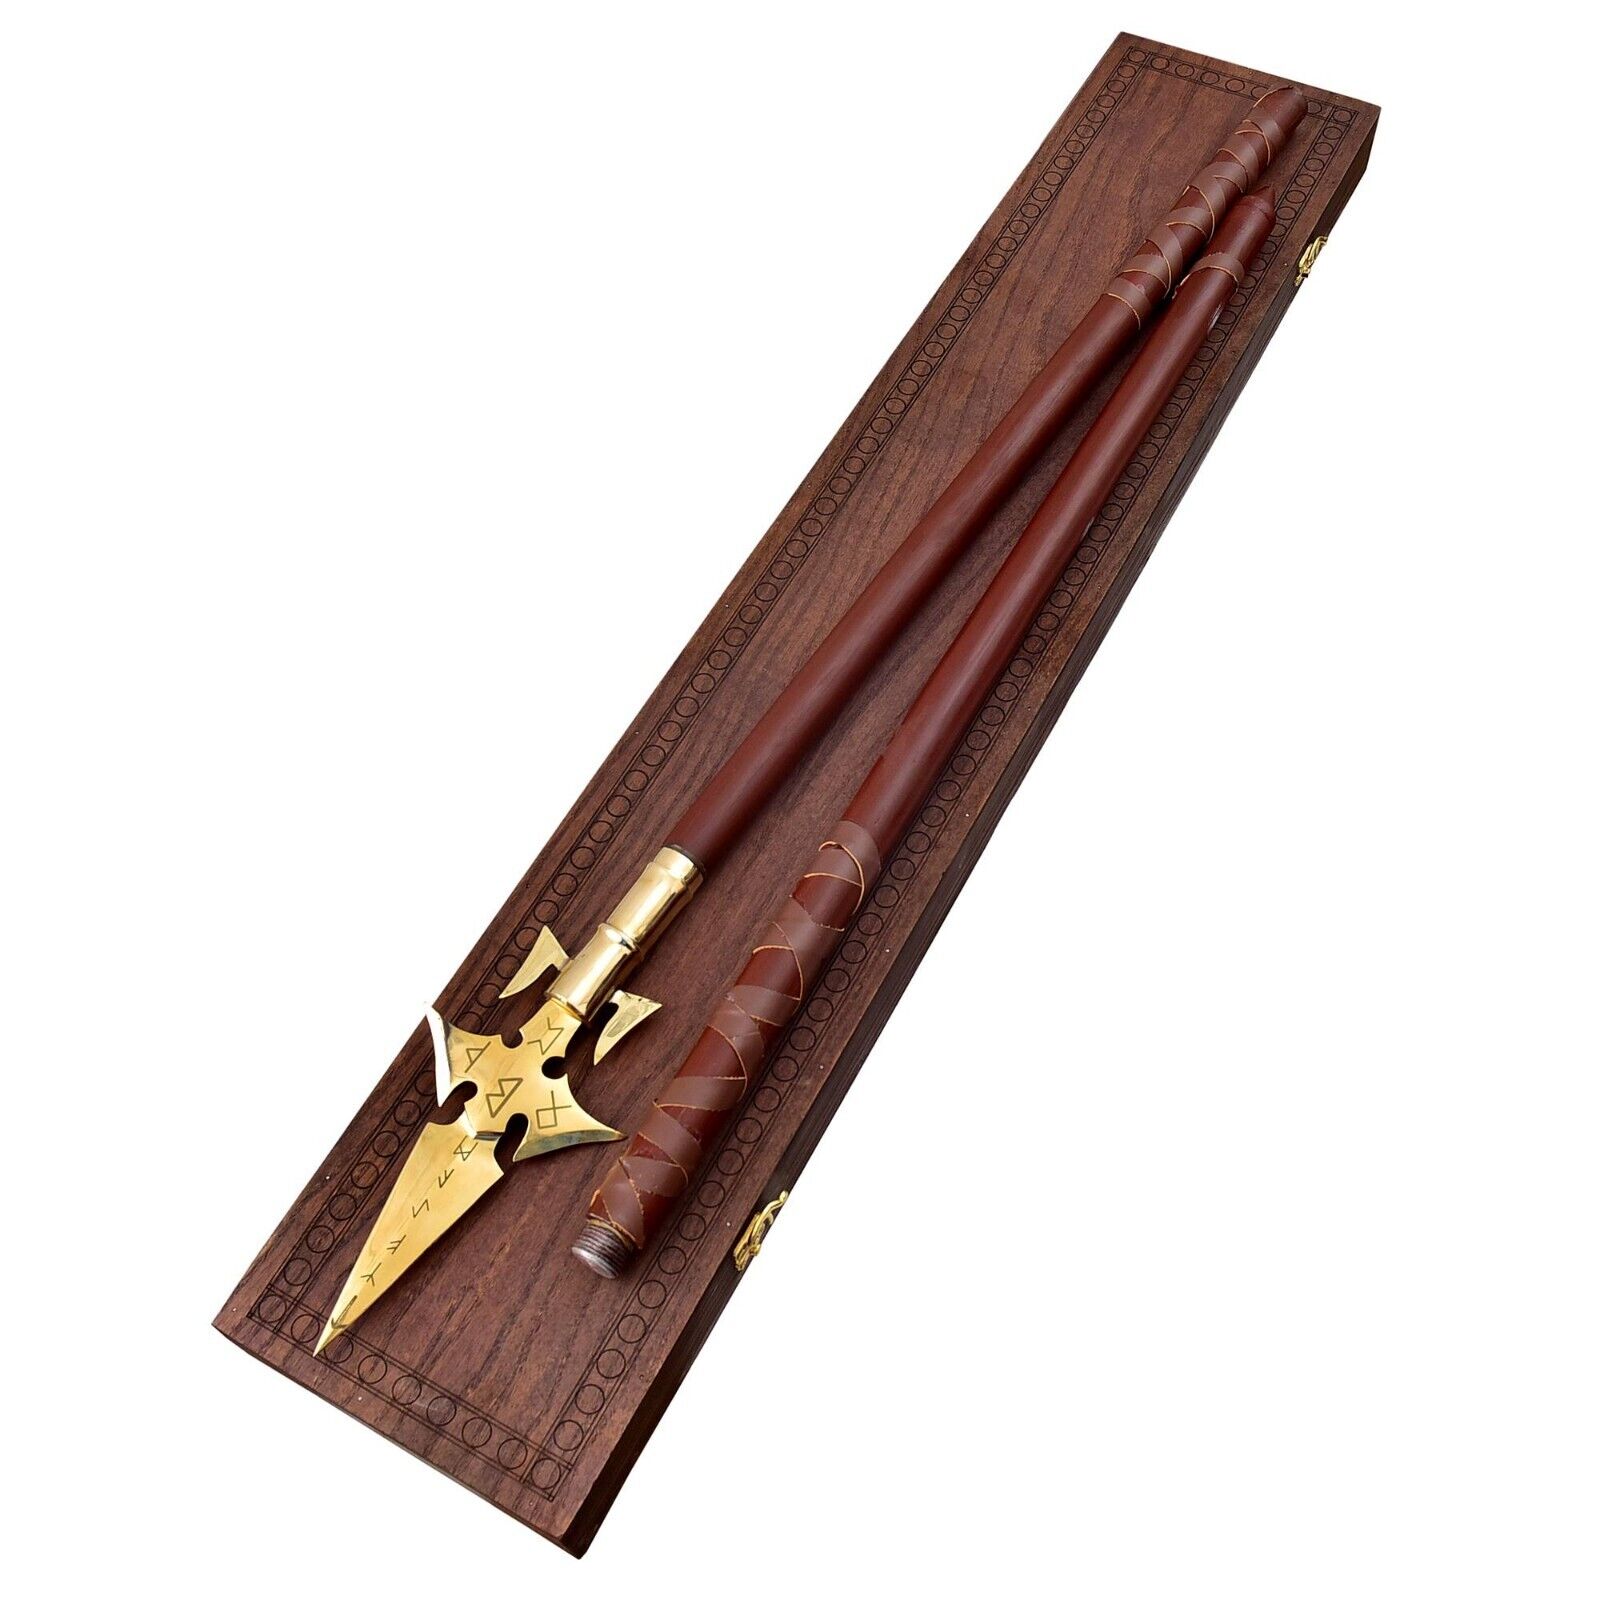 Norse Mythology Gungnir Spear | Handmade Viking Collectible Spear in Wooden Box